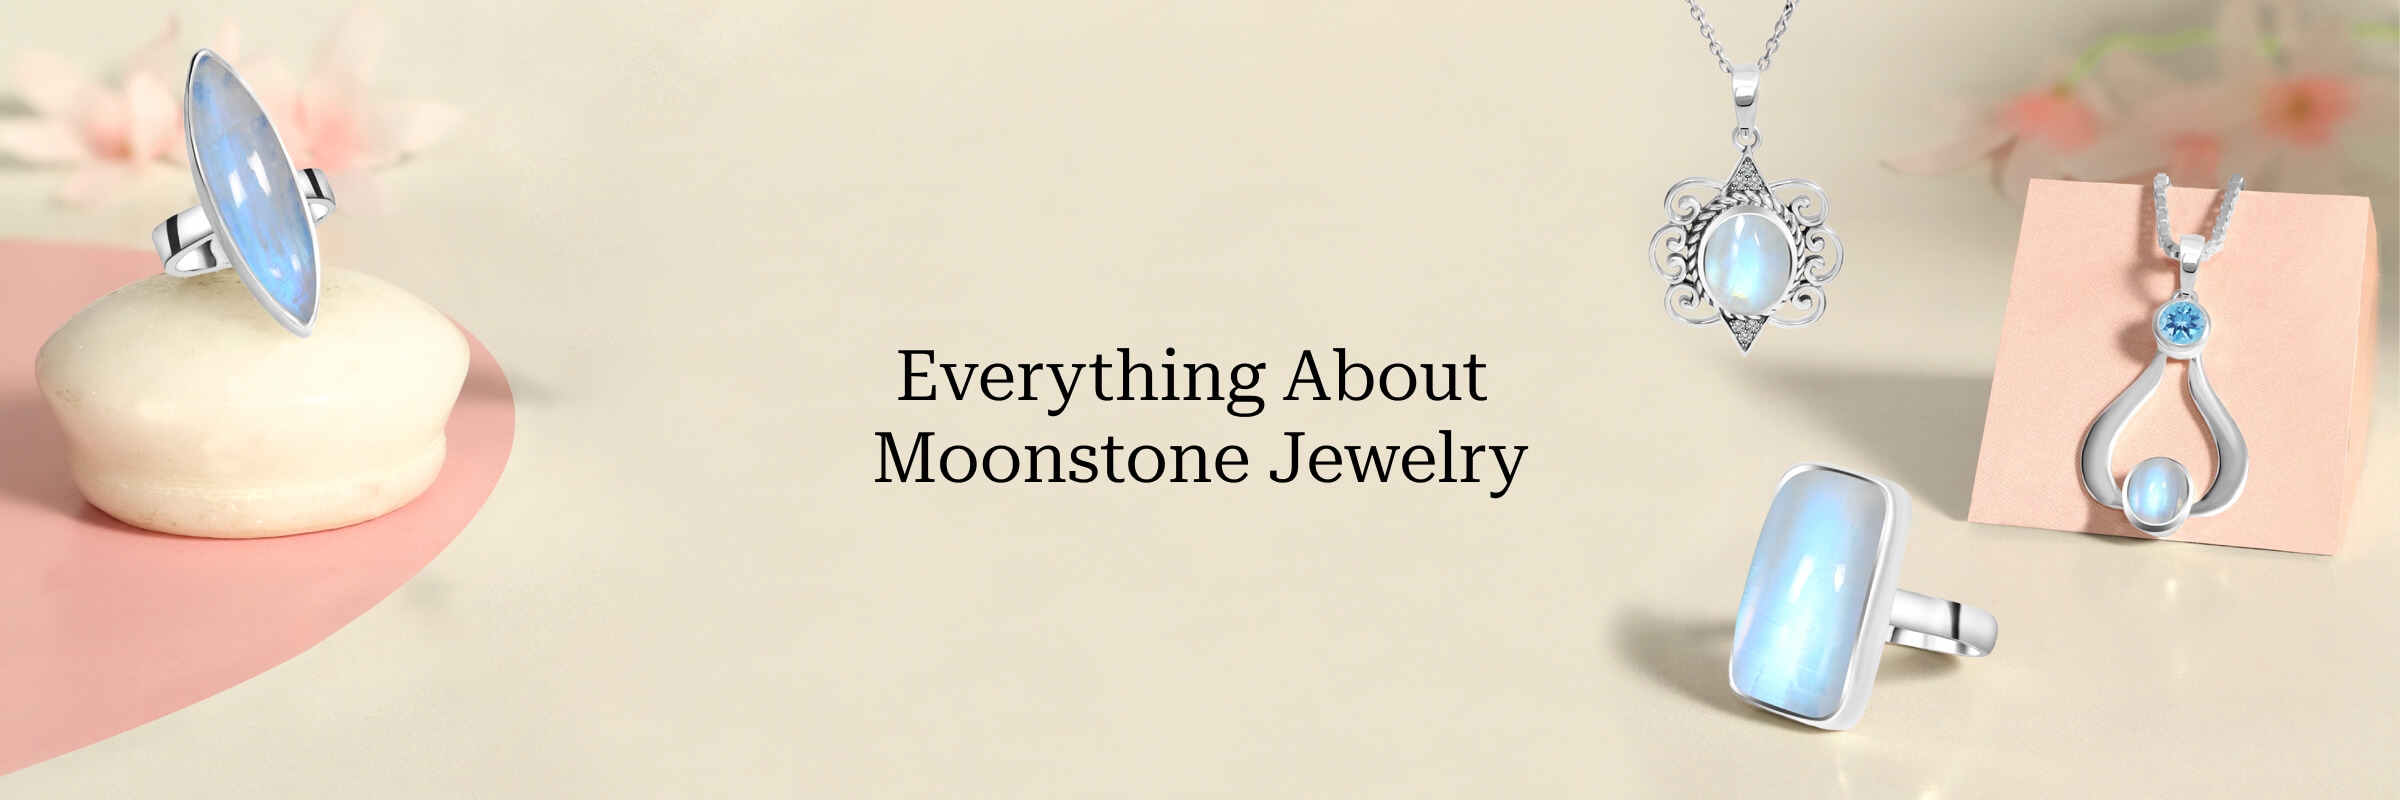 Moonstone Meaning, History, Origin and Healing Properties